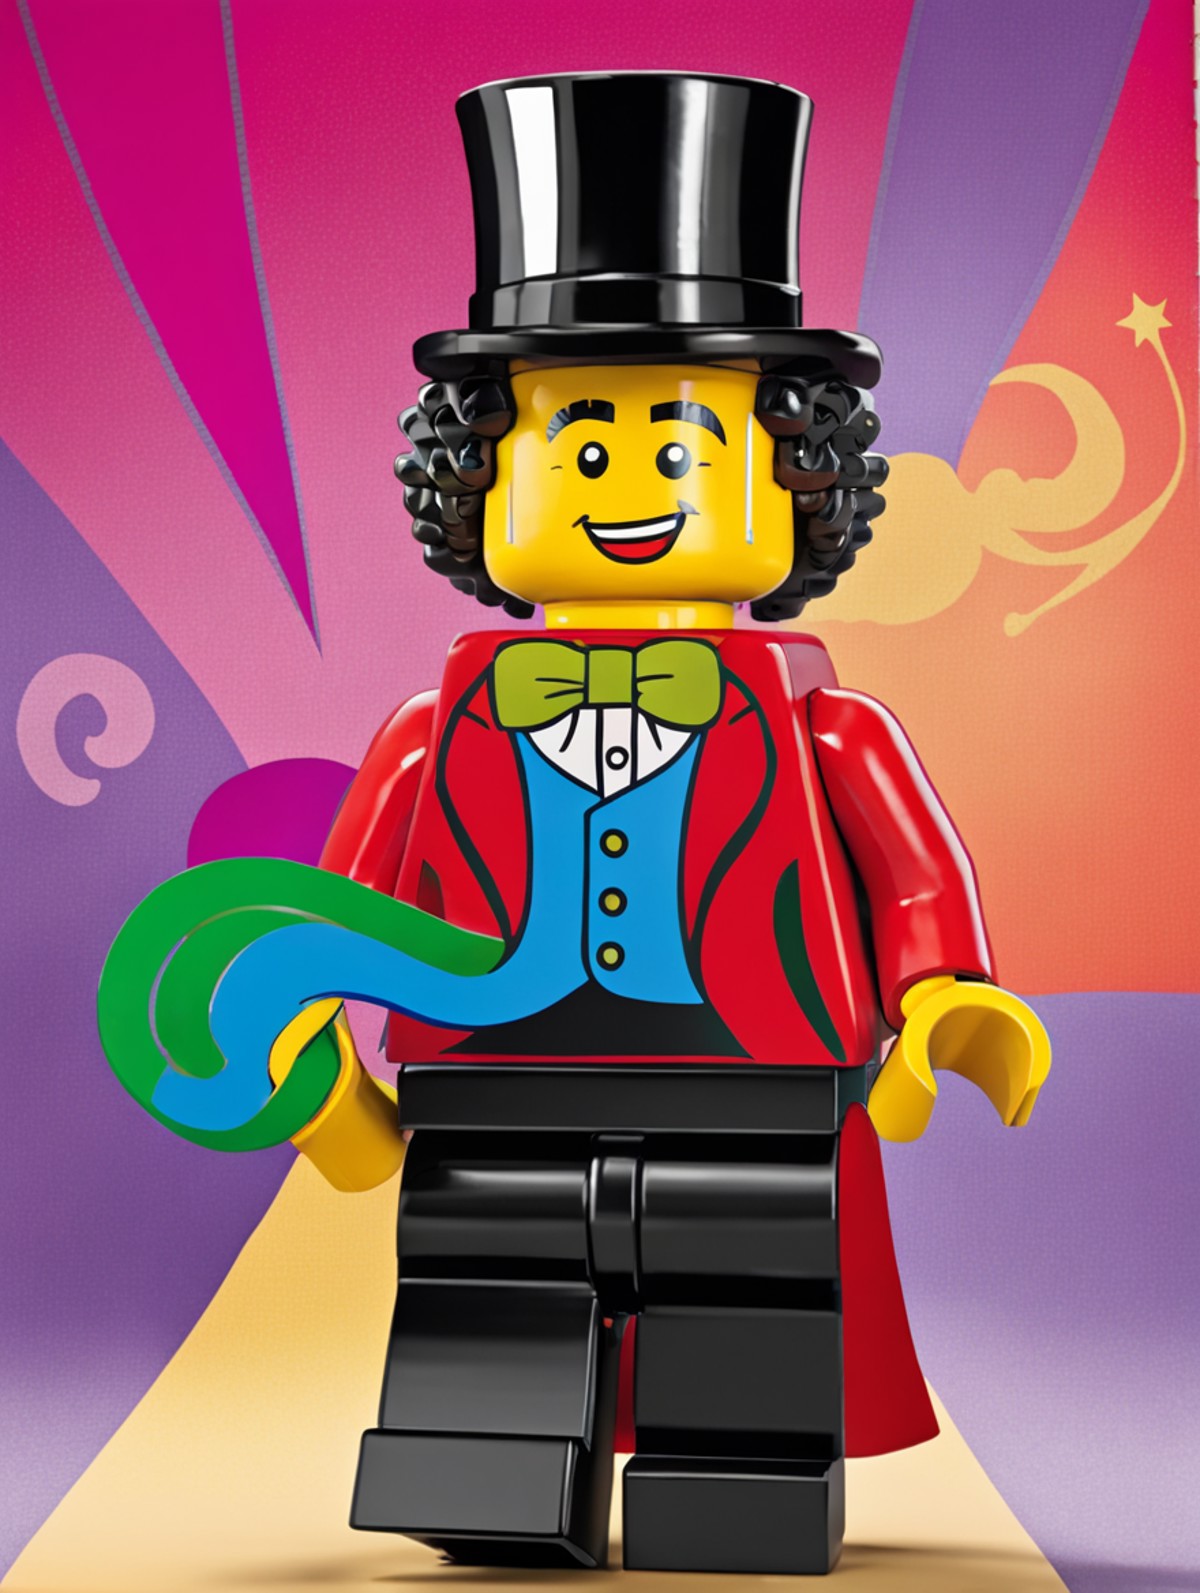 <lora:Lego_XL_v2.1:0.8>
LEGO MiniFig. 
A man with curly hair and a whimsical expression wears a velvet top hat and red coa...